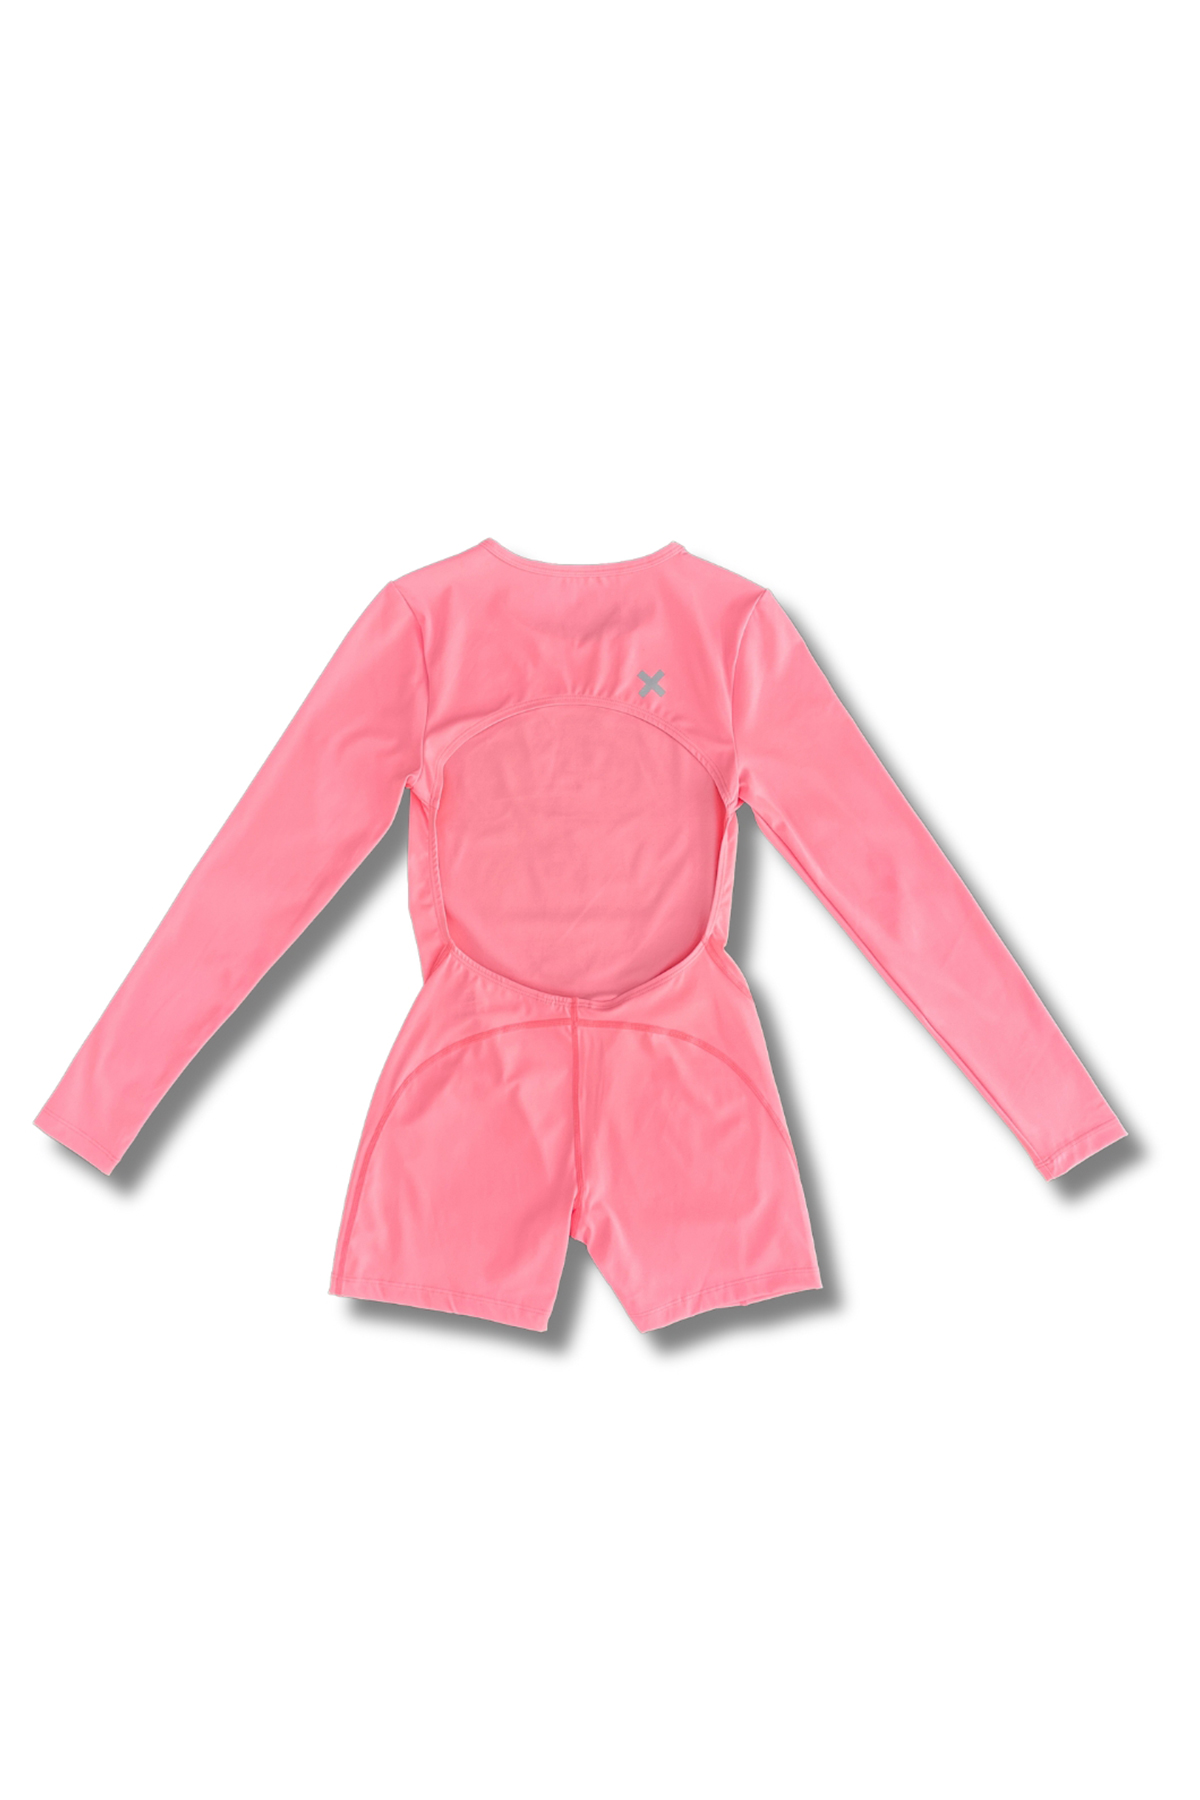 Fitted-Long-sleeved-Mid-Thigh-Yoga-Unitard-pink-back